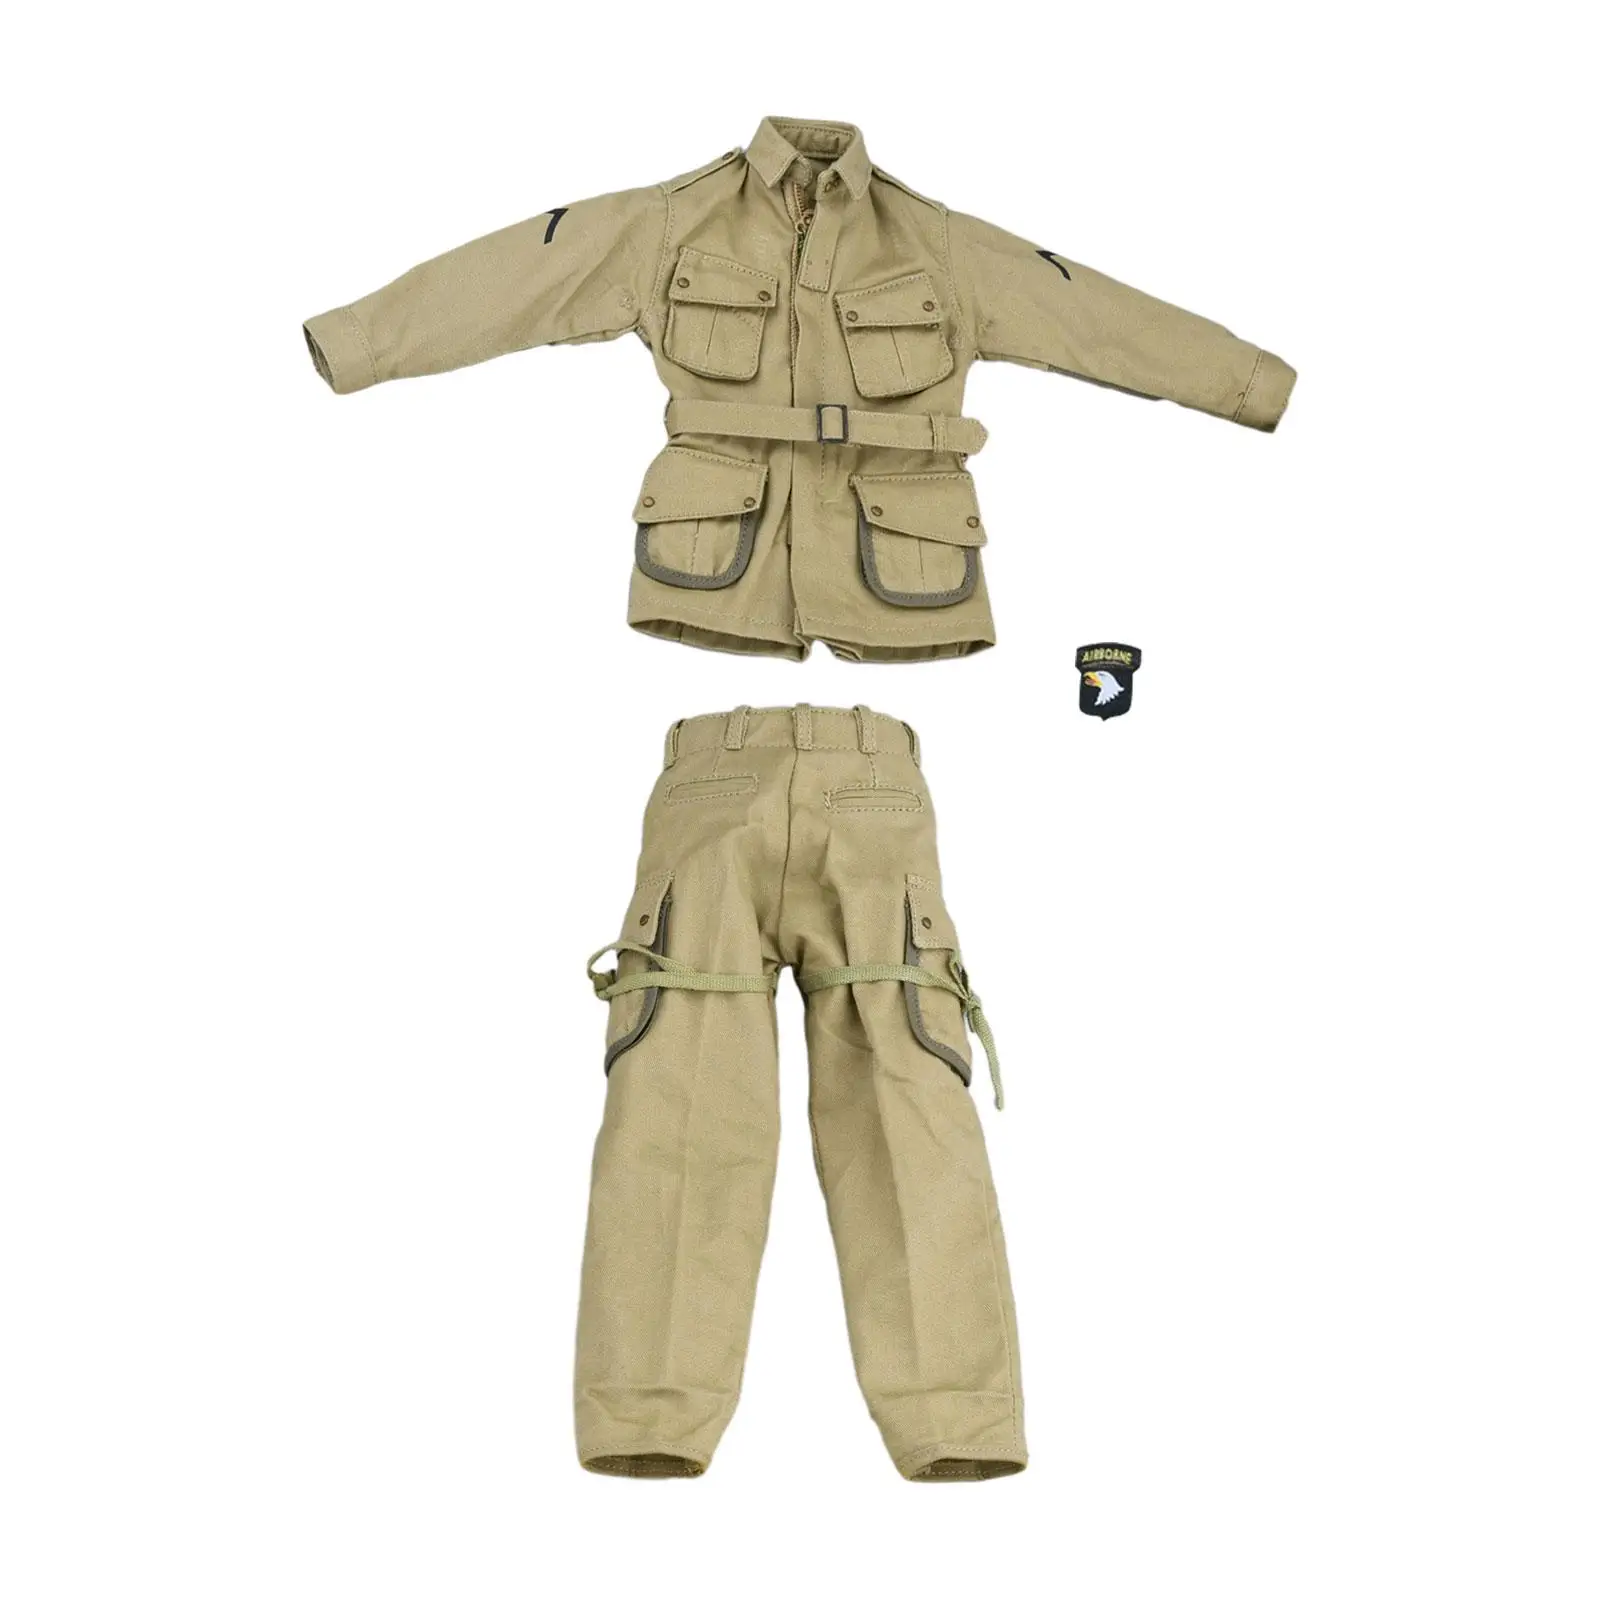 1/6 Figure Clothes Miniature Soldier Costume for 12`` inch Soldier Figures